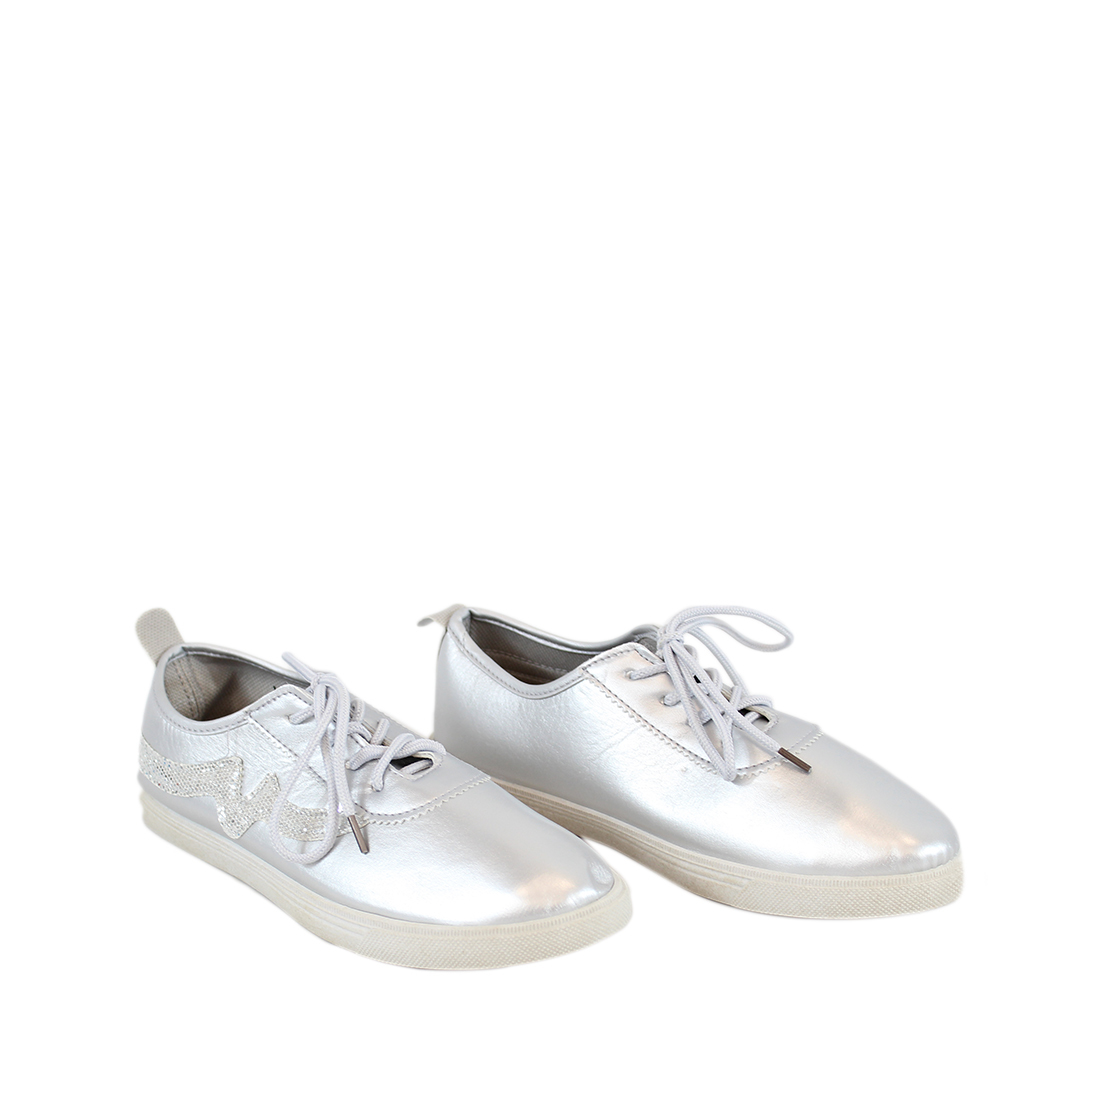 Spring sneakers with shiny glitters on side